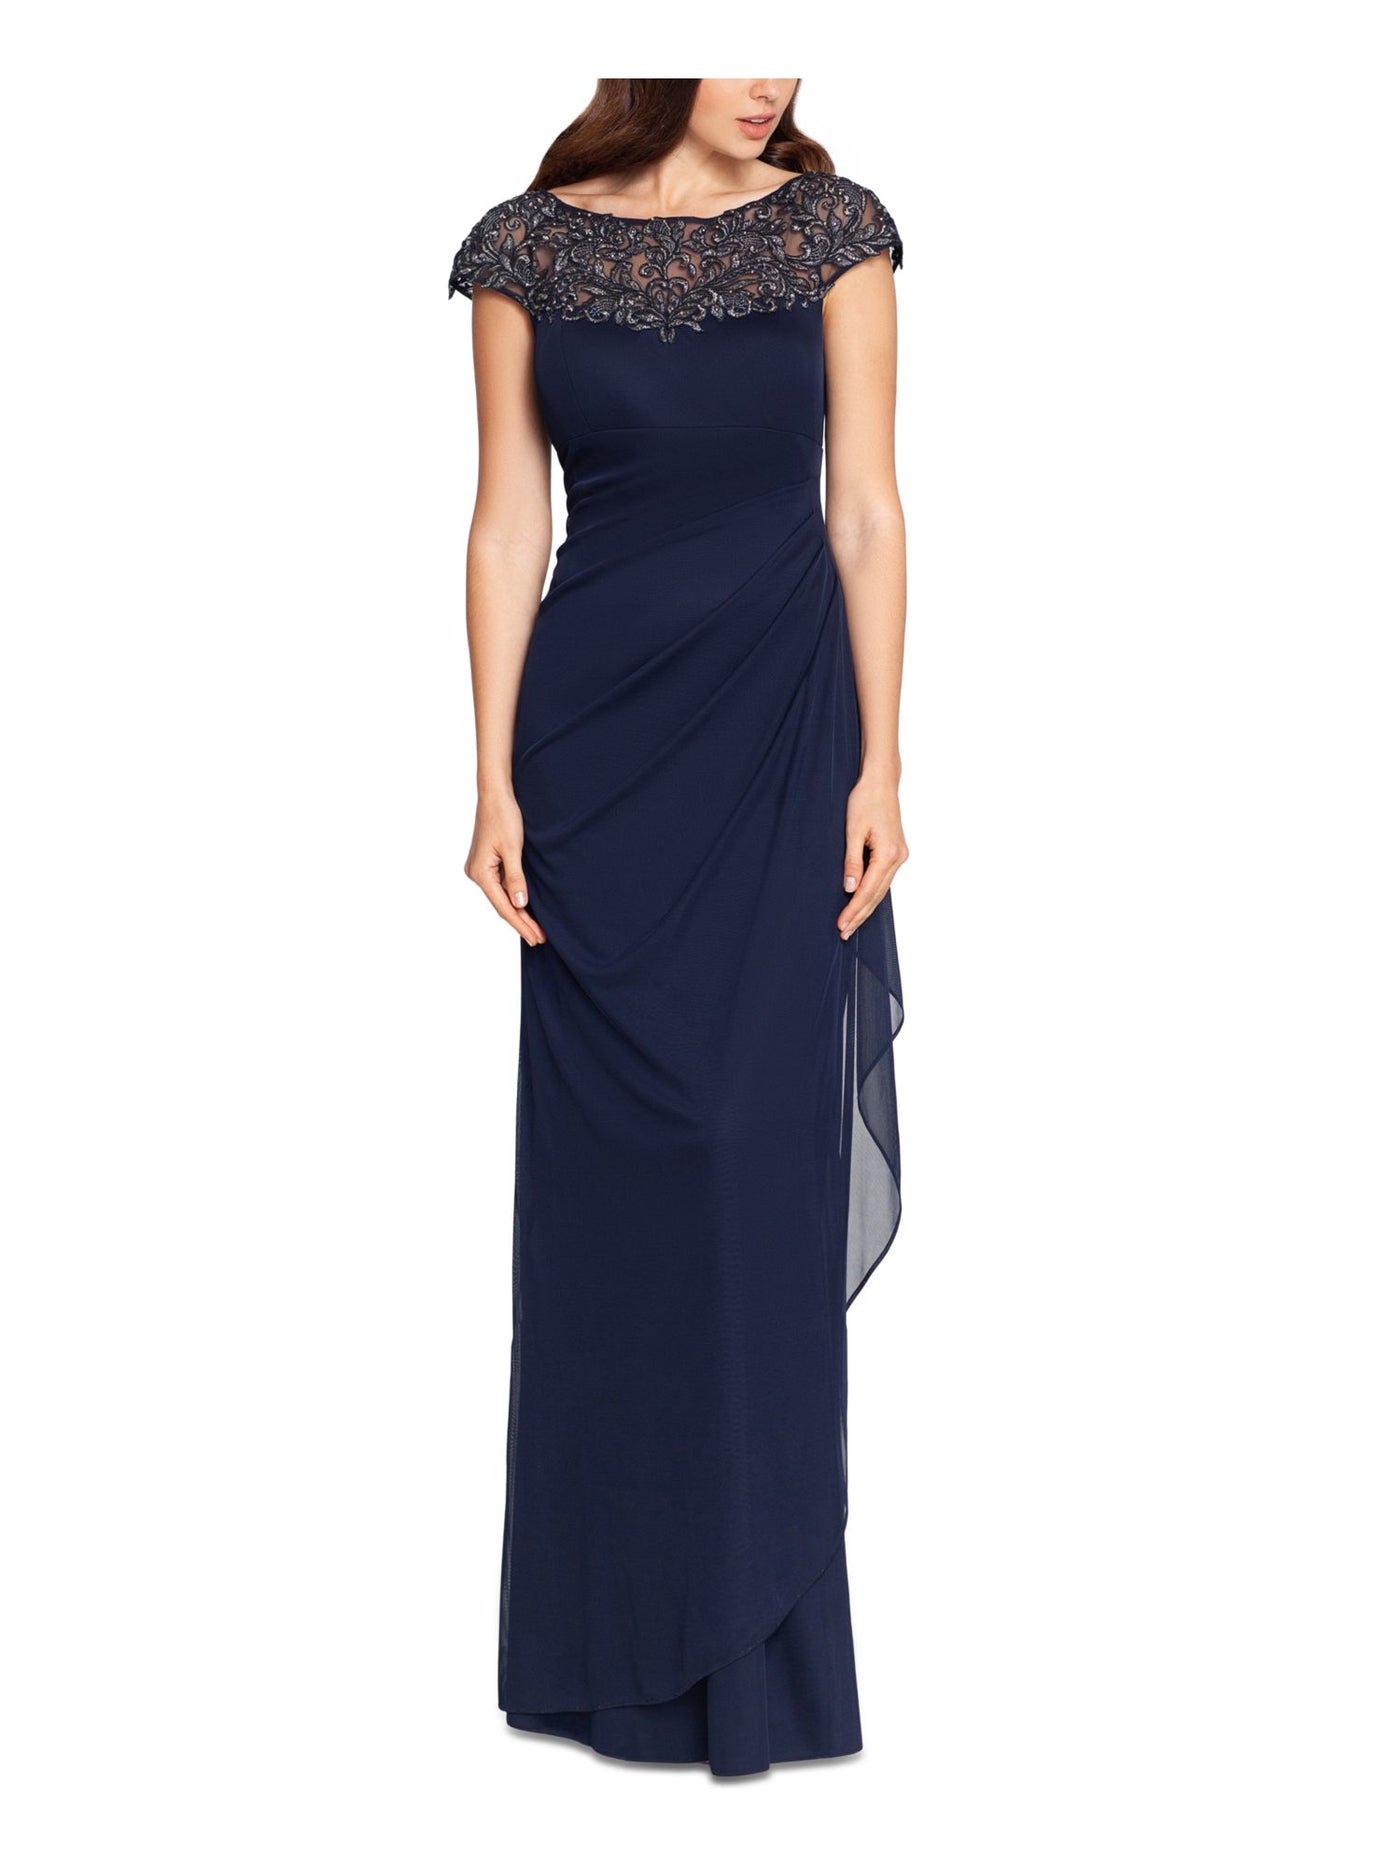 XSCAPE Womens Navy Ruched Zippered Empire Waist Draped Detail Cap Sleeve Jewel Neck Full-Length Formal Gown Dress Petites 10P